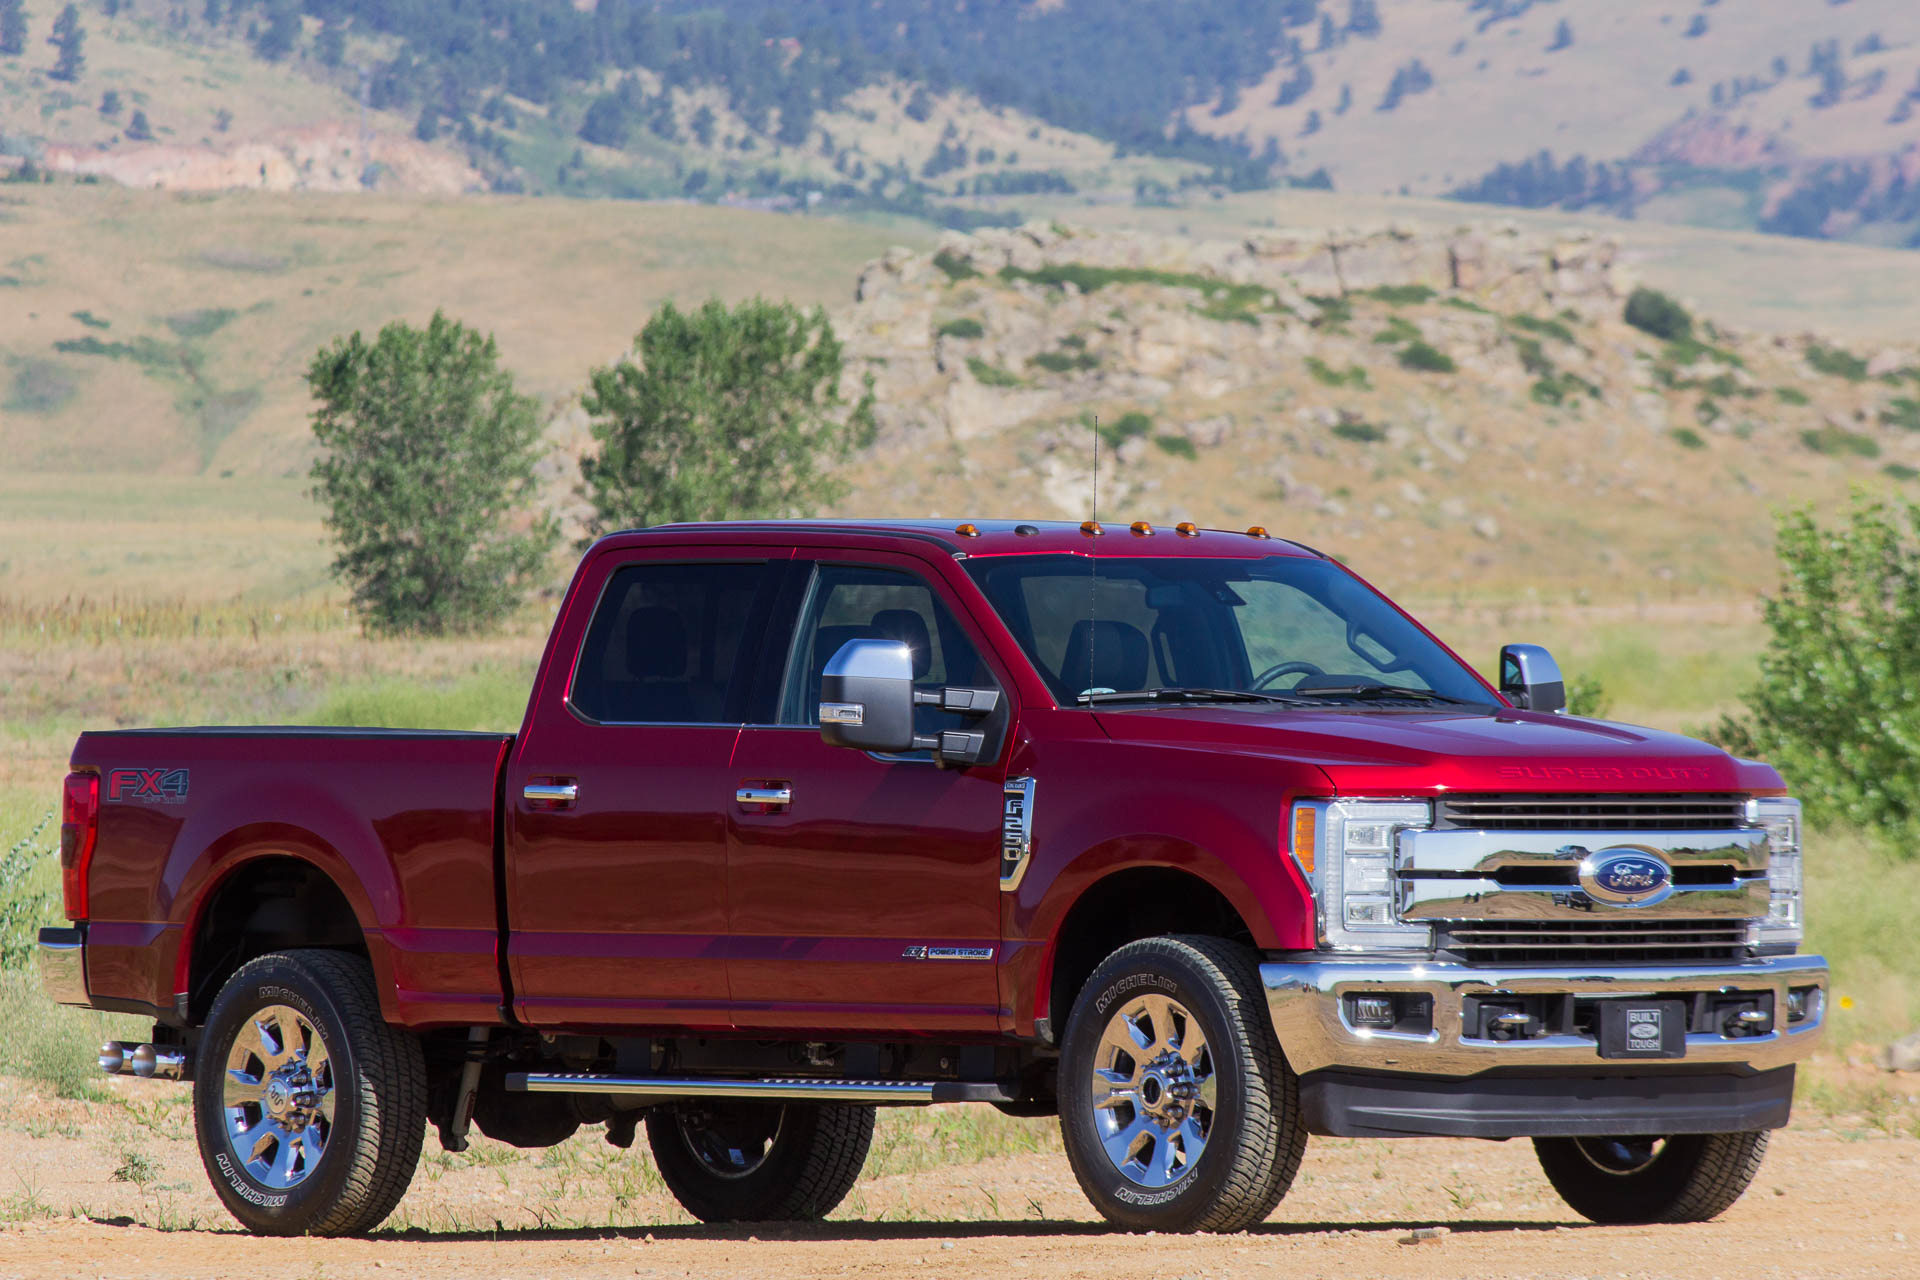 Does it matter that the new 2017 Ford Super Duty is aluminum like the F